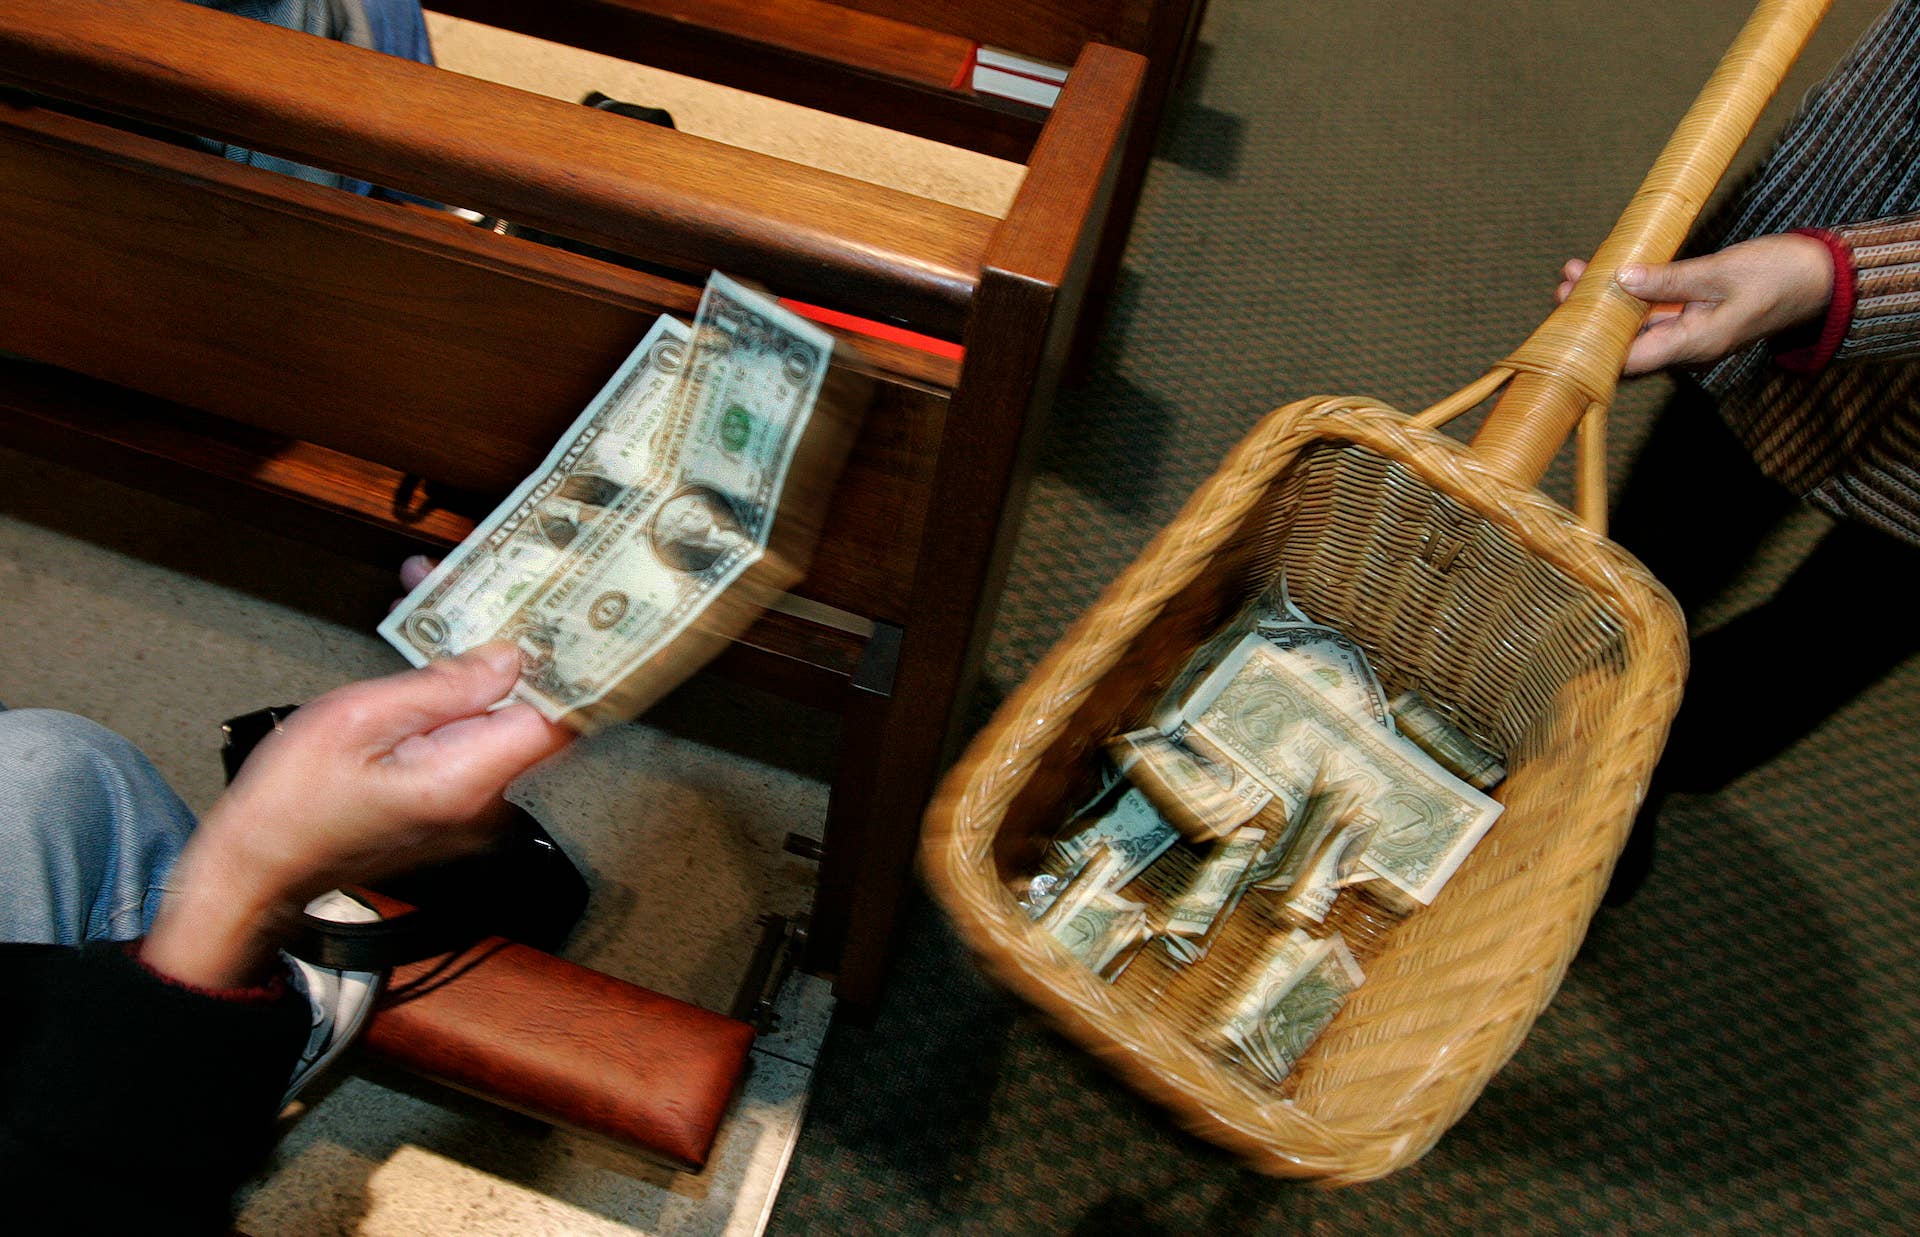 A churchgoer places money in the offering basket